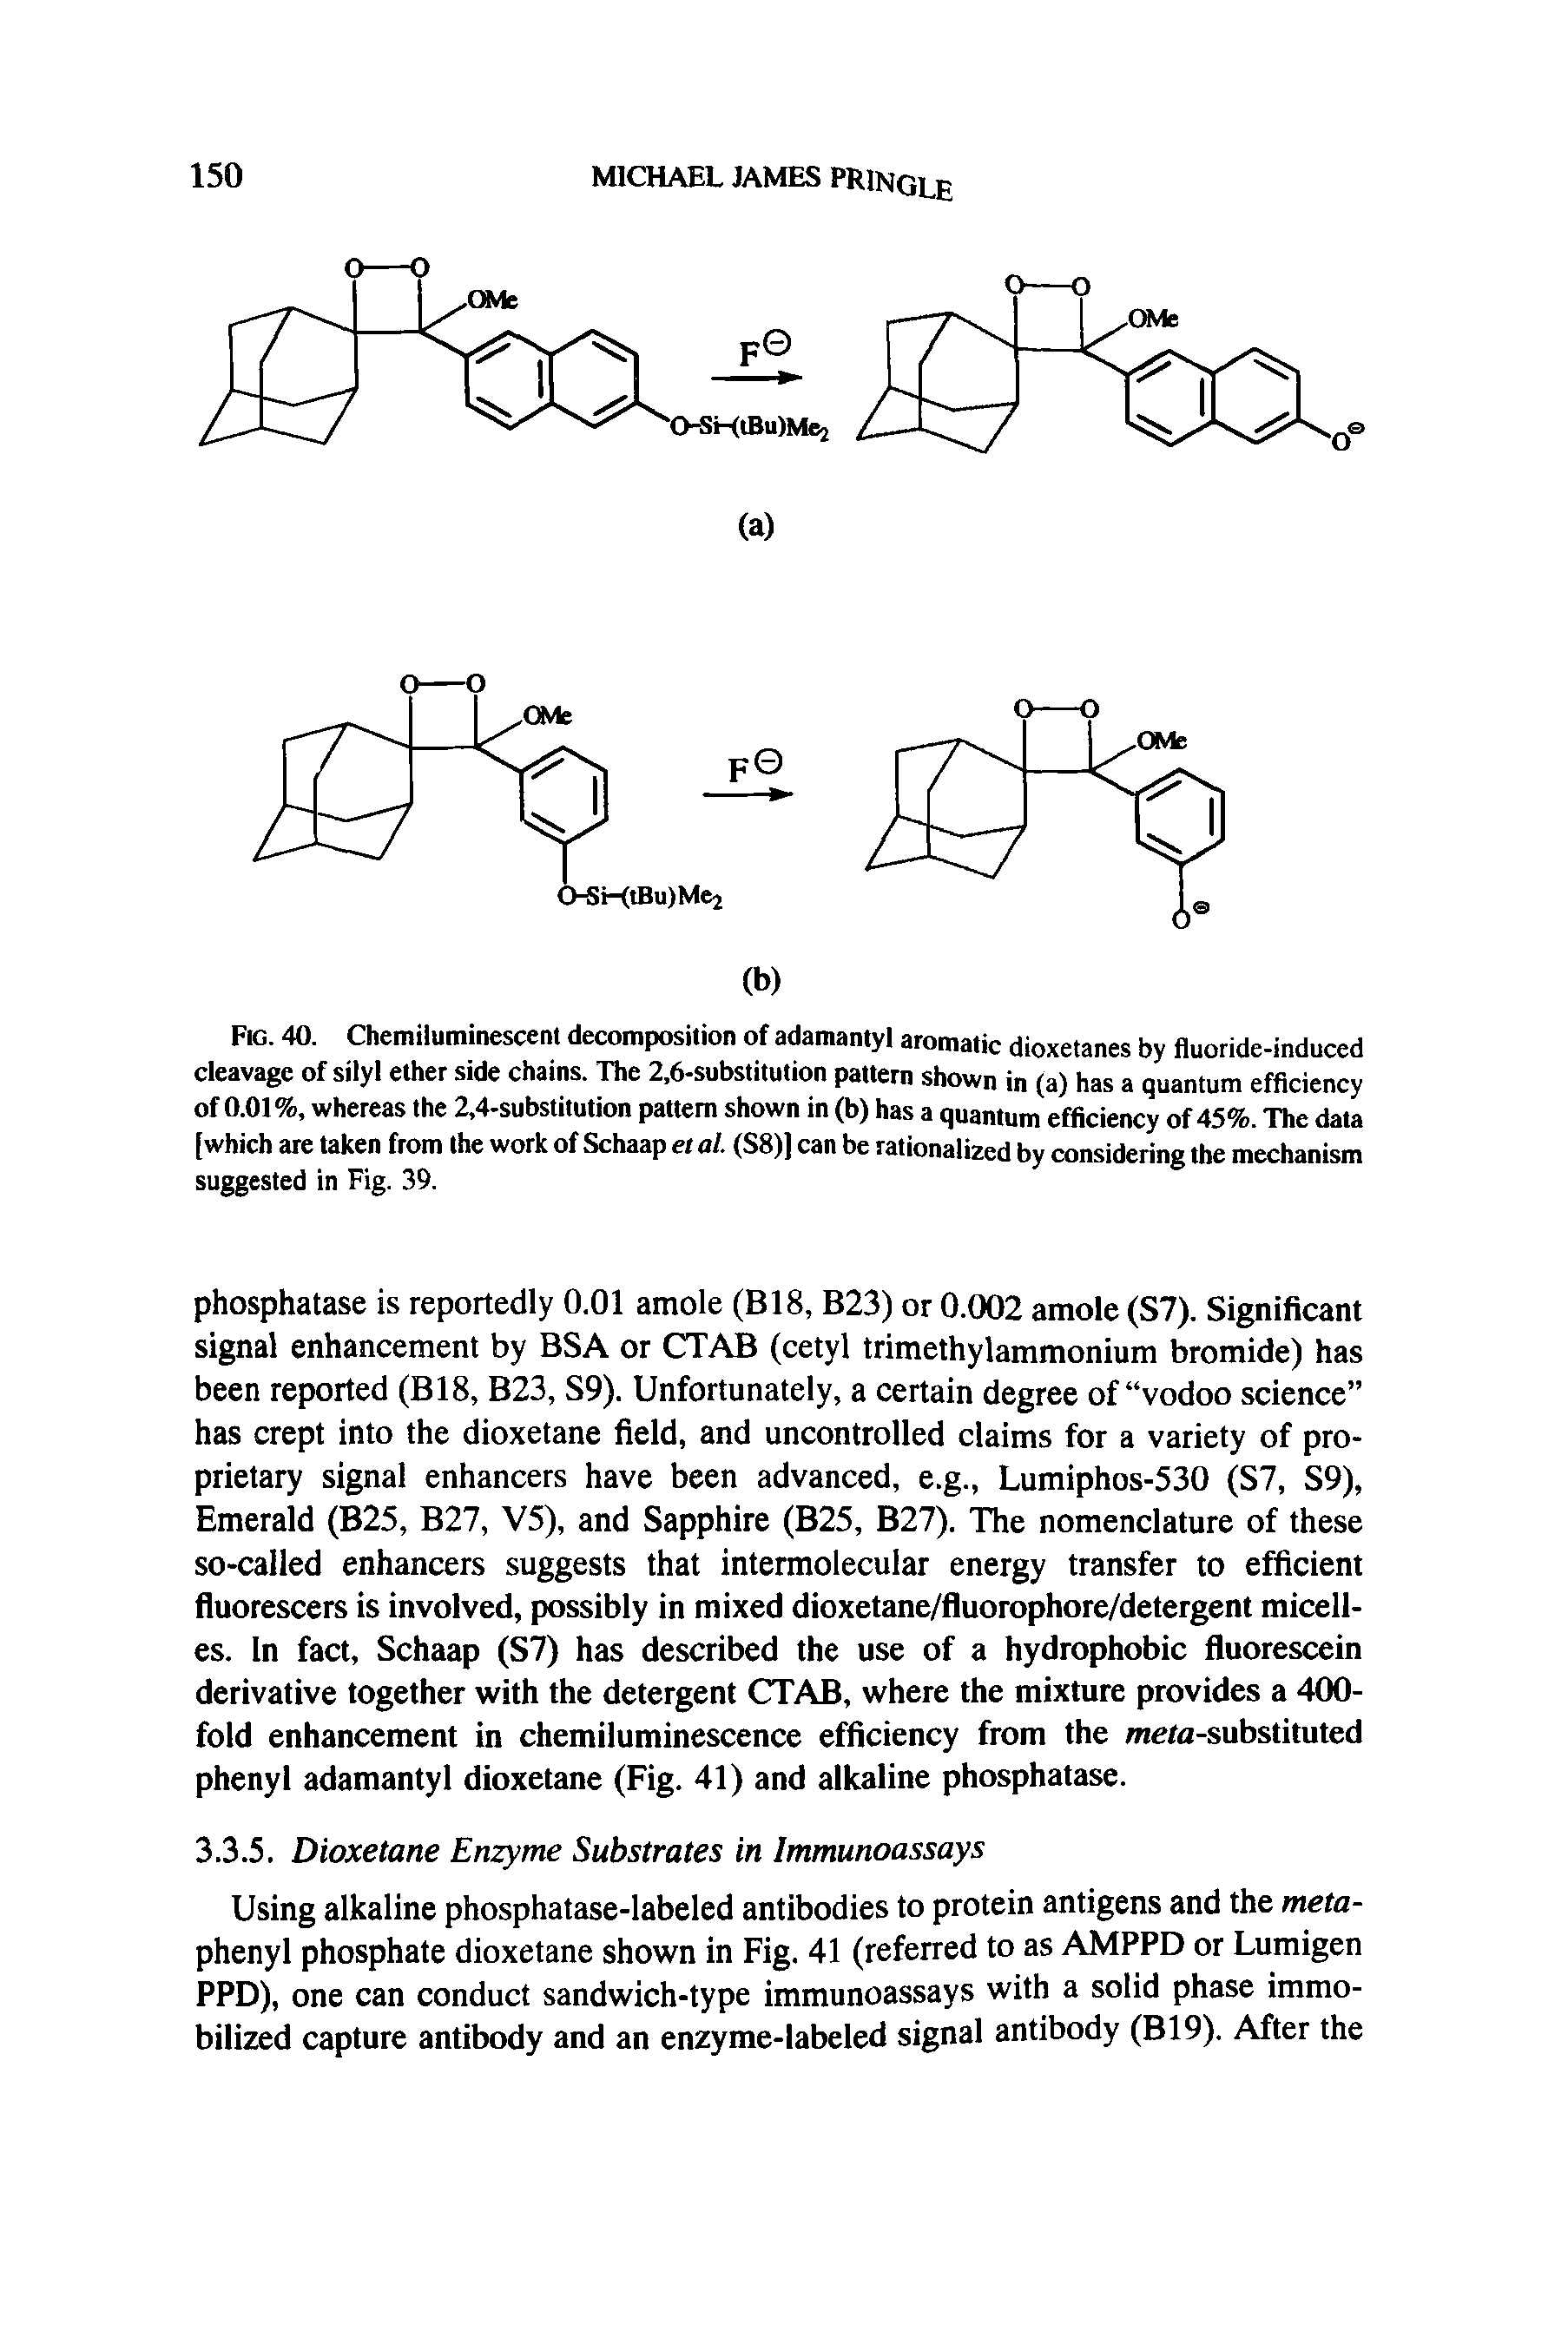 Fig. 40. Chemiluminescent decomposition of adamantyl aromatic dioxetanes by fluoride-induced cleavage of silyl ether side chains. The 2,6-substitution pattern shown in (a) has a quantum efficiency of 0.01%, whereas the 2,4-substitution pattern shown in (b) has a quantum efficiency of 45%. The data [which are taken from the work of Schaap et al. (S8)] can be rationalized by considering the mechanism suggested in Fig. 39.